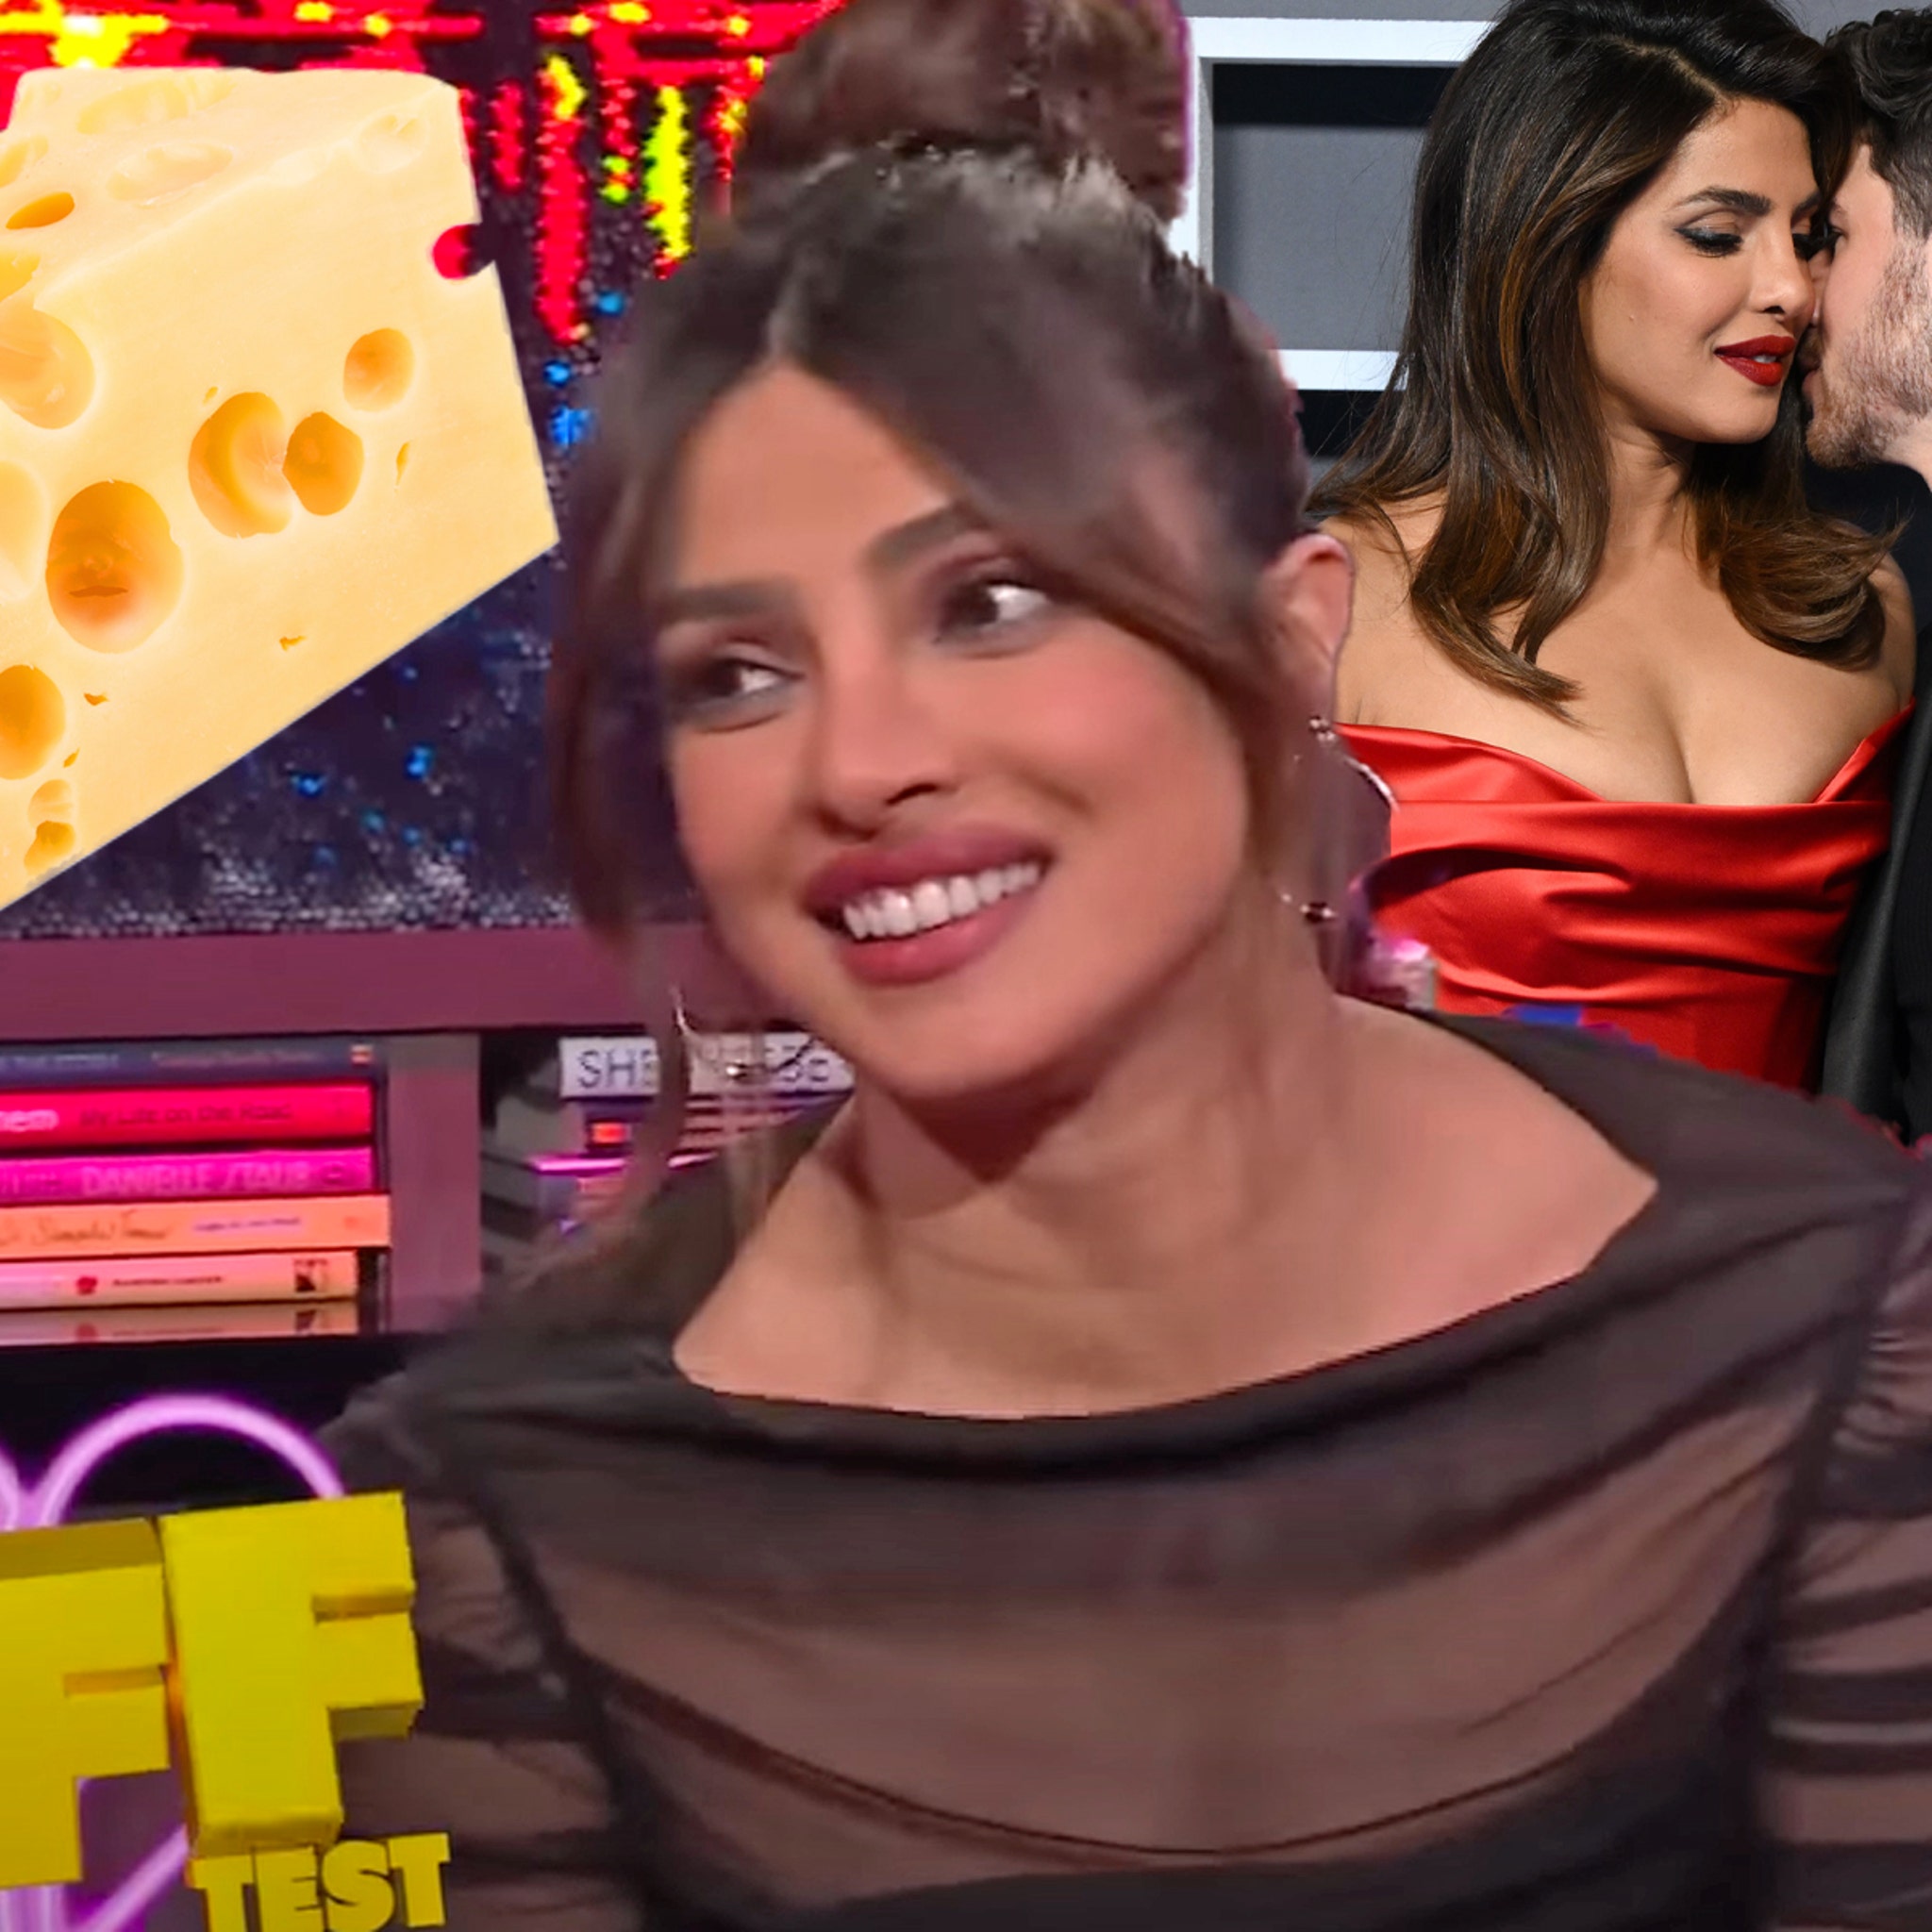 Priyanka Chopra Talks Sex on First Date, Oral Or Cheese, and Giving Fake Numbers hq nude pic